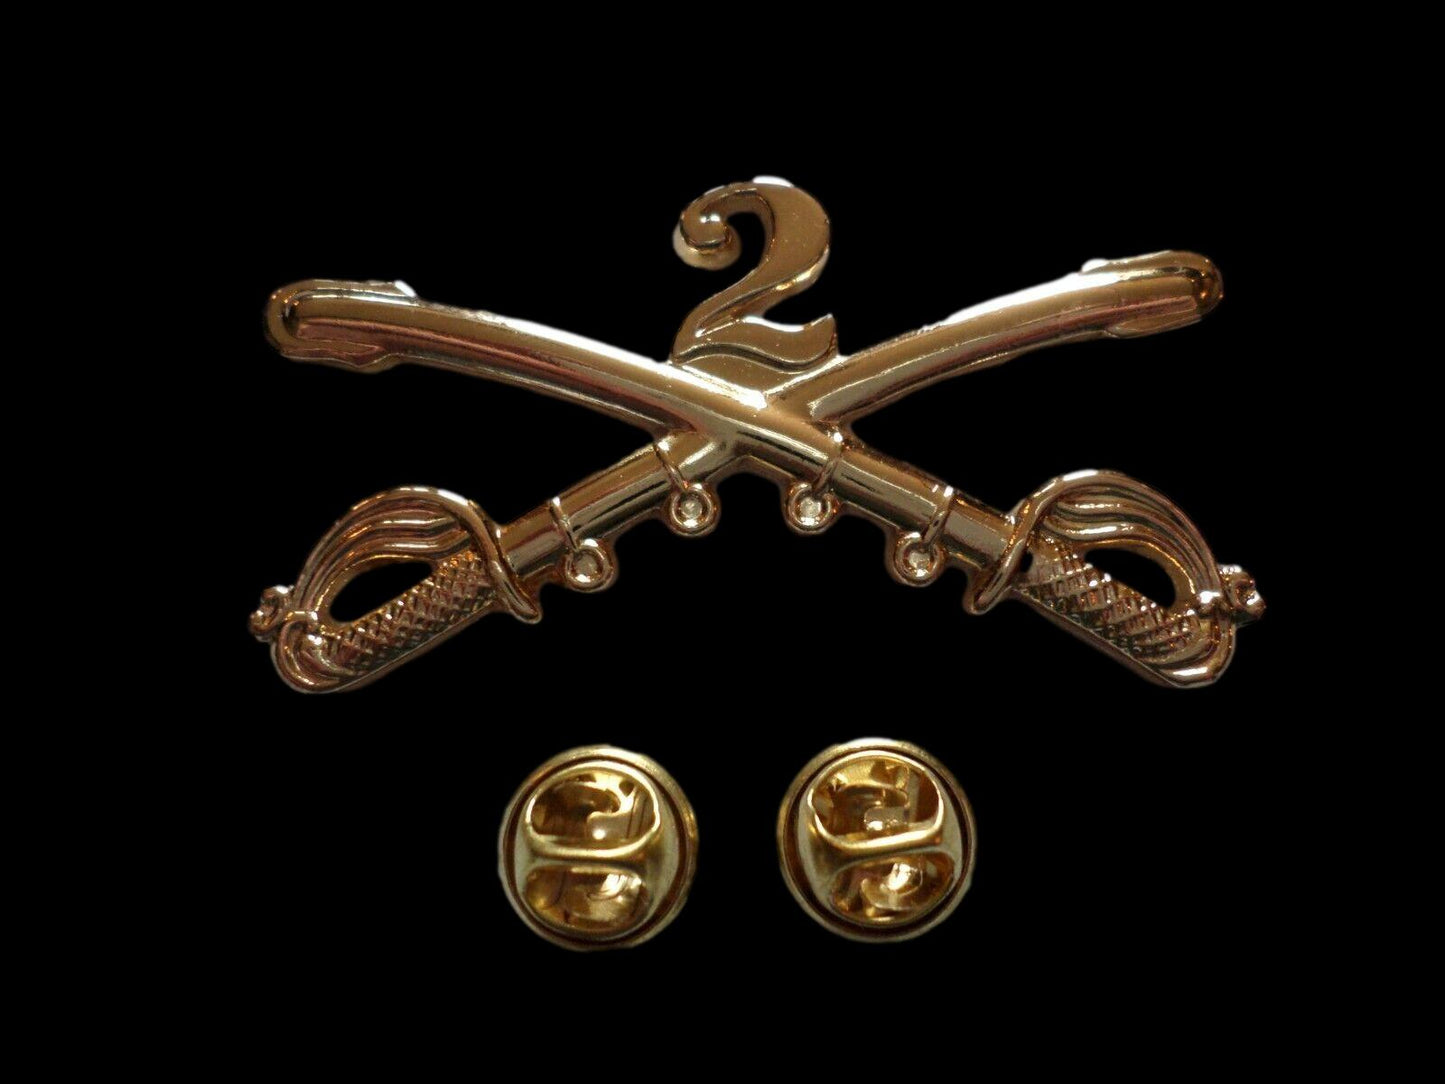 2nd CAVALRY SWORDS SABERS  MILITARY HAT PIN 2nd CAVALRY REGIMENT BADGE